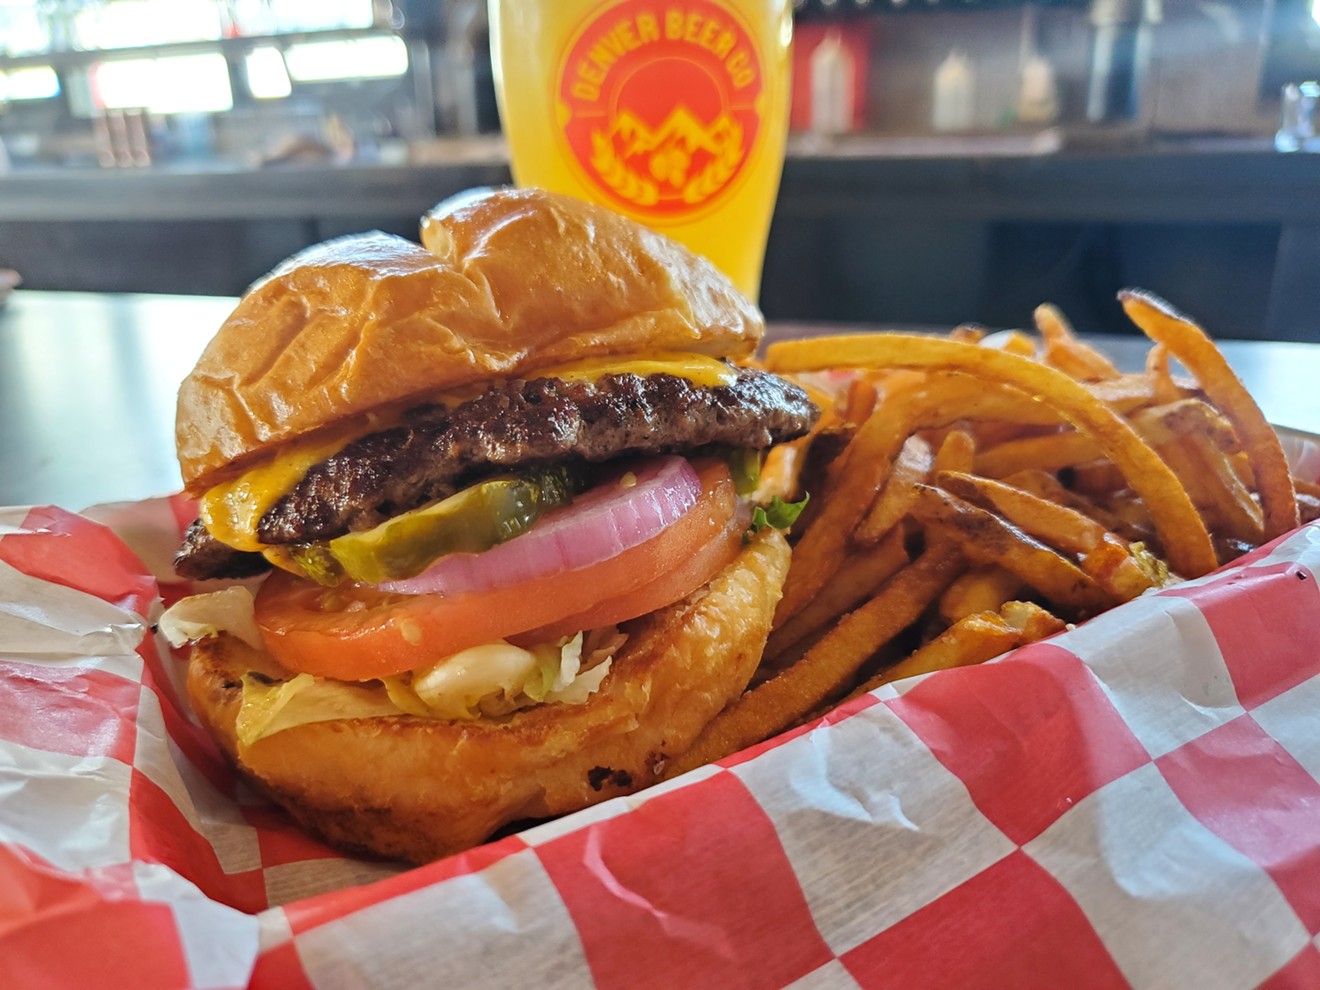 The Mighty Burger is now open at Denver Beer Company's Platte Street location.